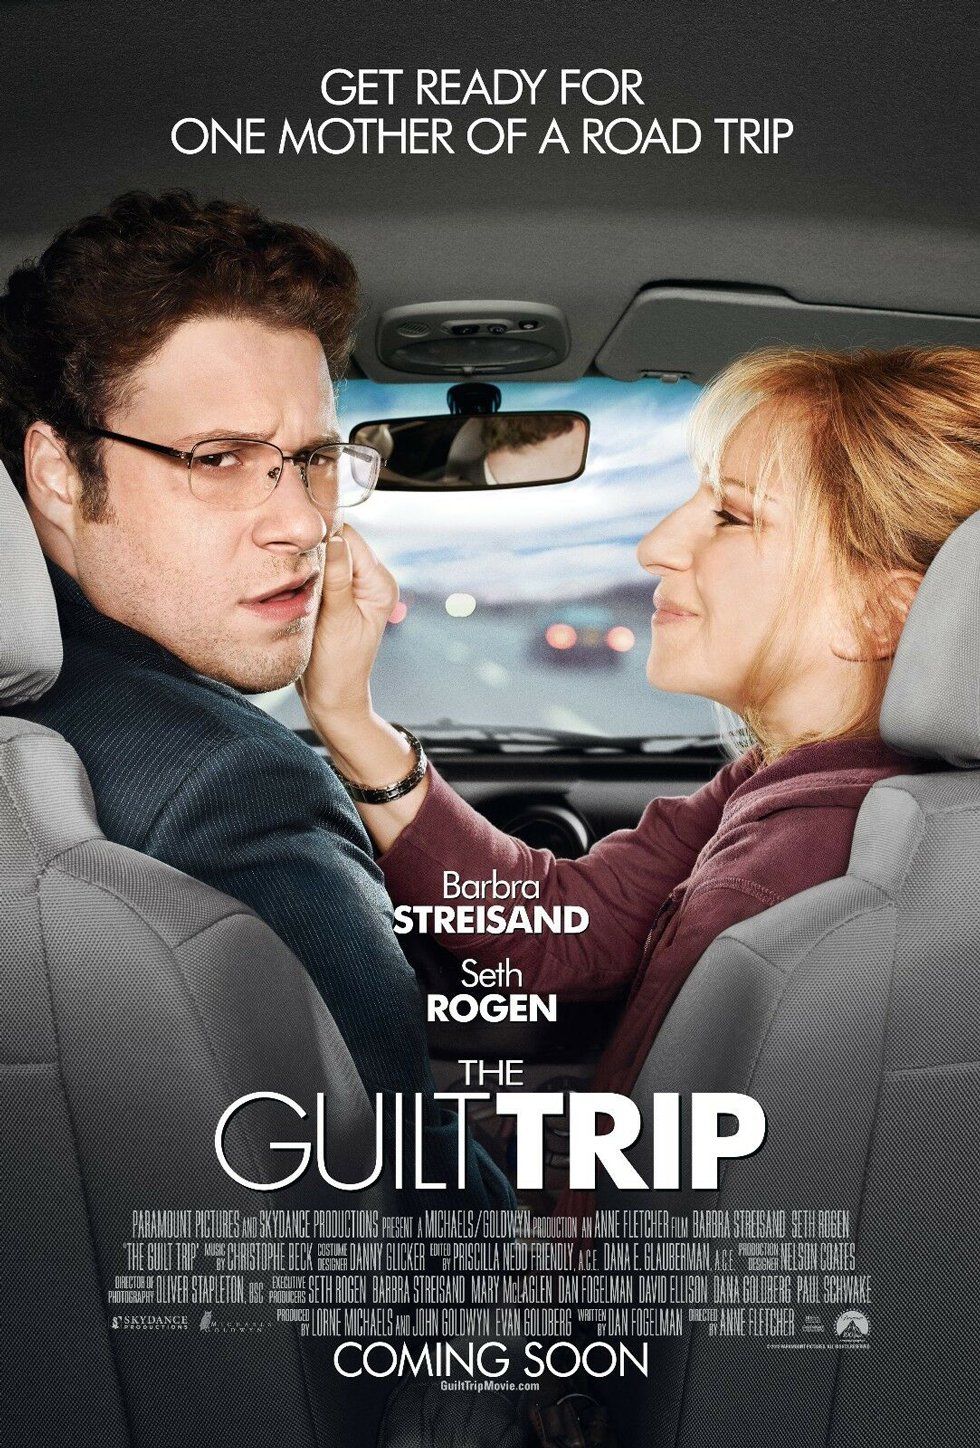 The Guilt Trip U.S. theatrical poster.